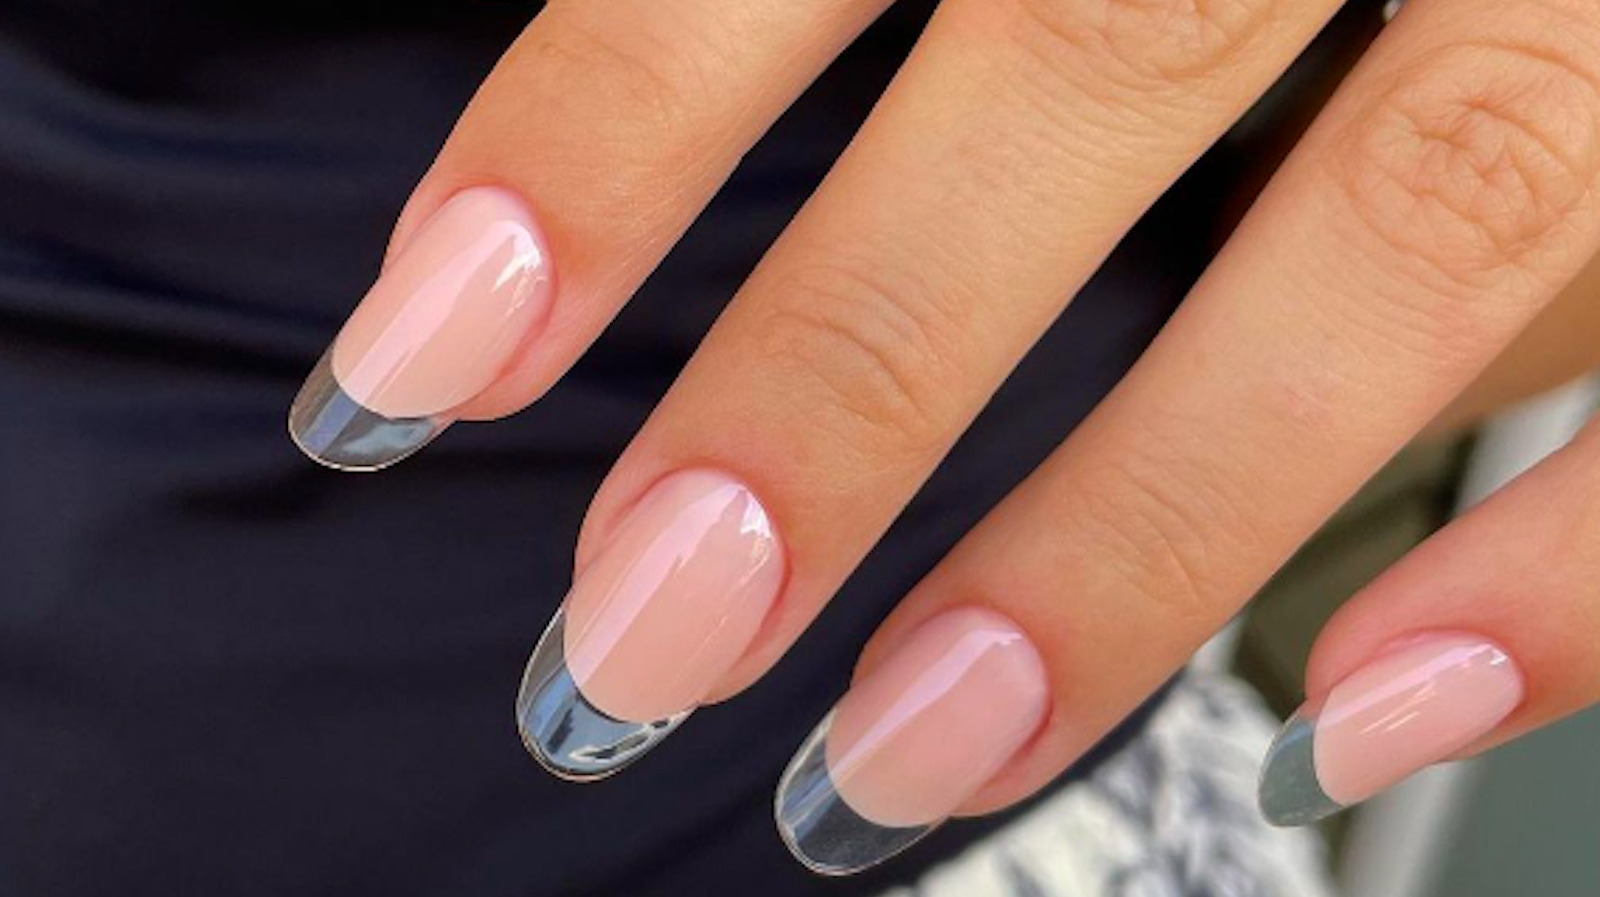 Crystal Nails: The New Nail Art Trend Taking Over Instagram | Glamour